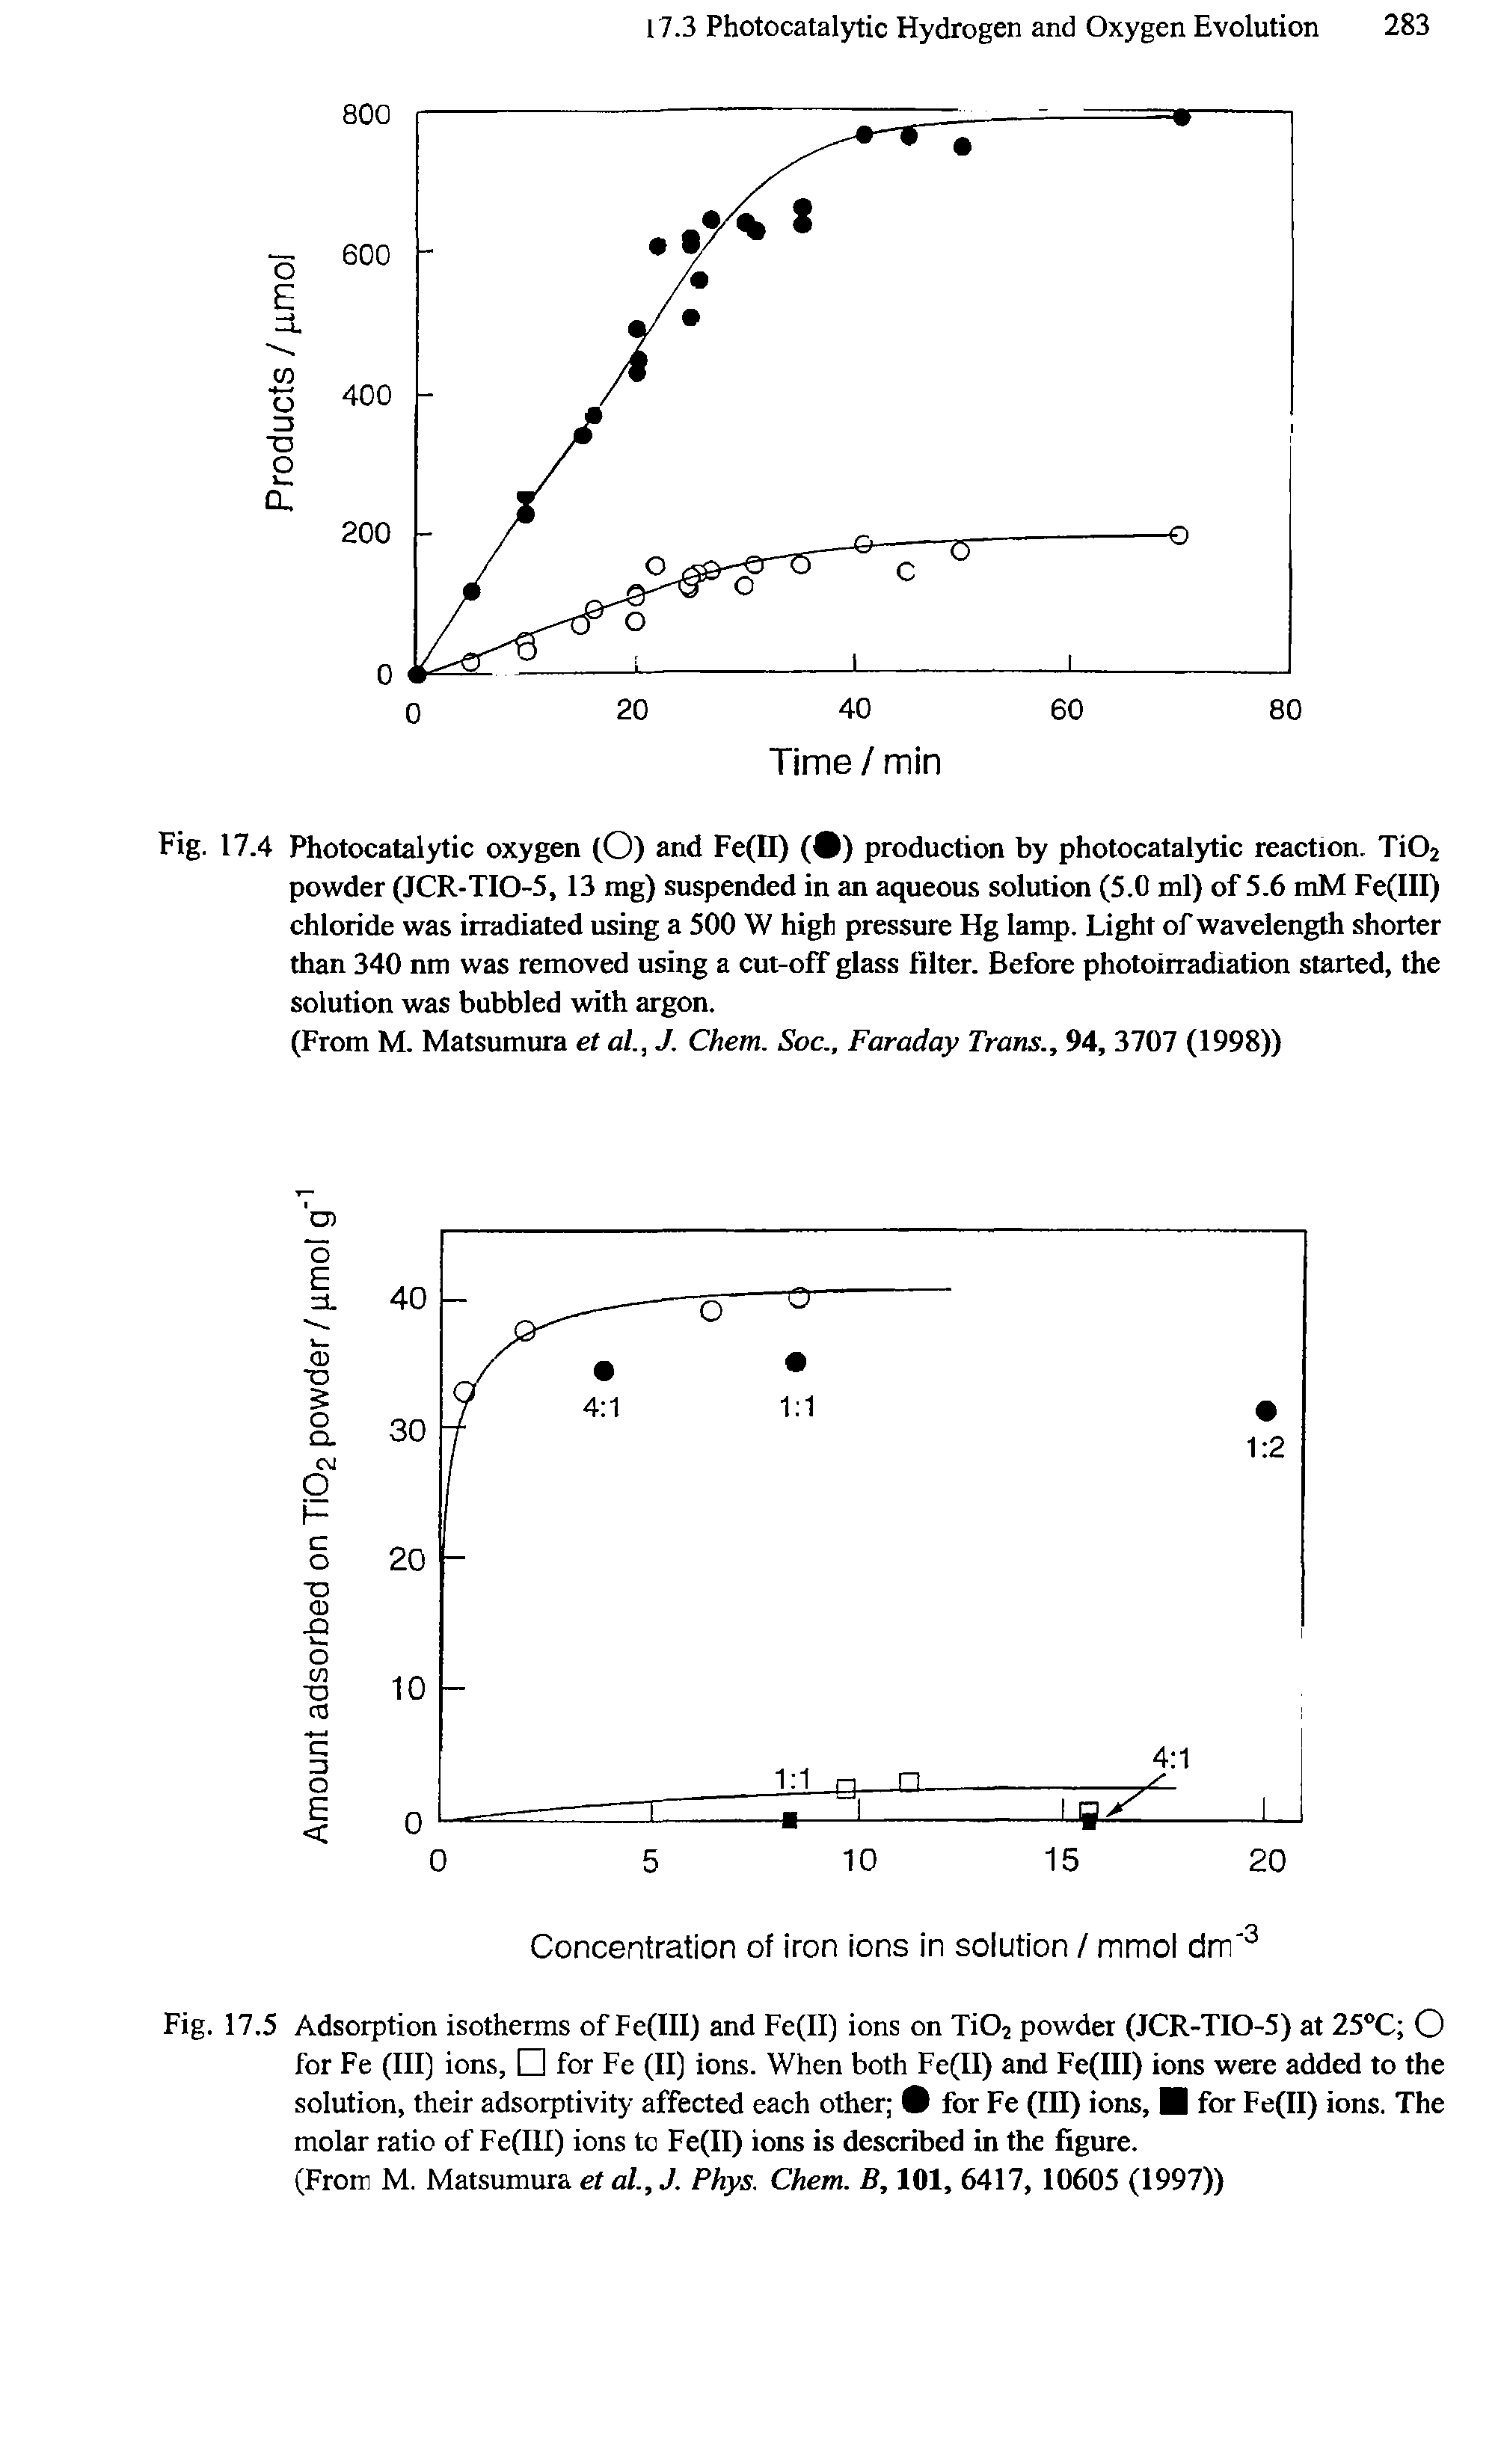 Fig. 17.4 Photocatalytic oxygen (O) and Fe(II) ( ) production by photocatalytic reaction. Ti02 powder (JCR-TIO-5, 13 mg) suspended in an aqueous solution (5.0 ml) of 5.6 mM Fe(III) chloride was irradiated using a 500 W high pressure Hg lamp. Light of wavelength shorter than 340 nm was removed using a cut-off glass filter. Before photoirradiation started, the solution was bubbled with argon.